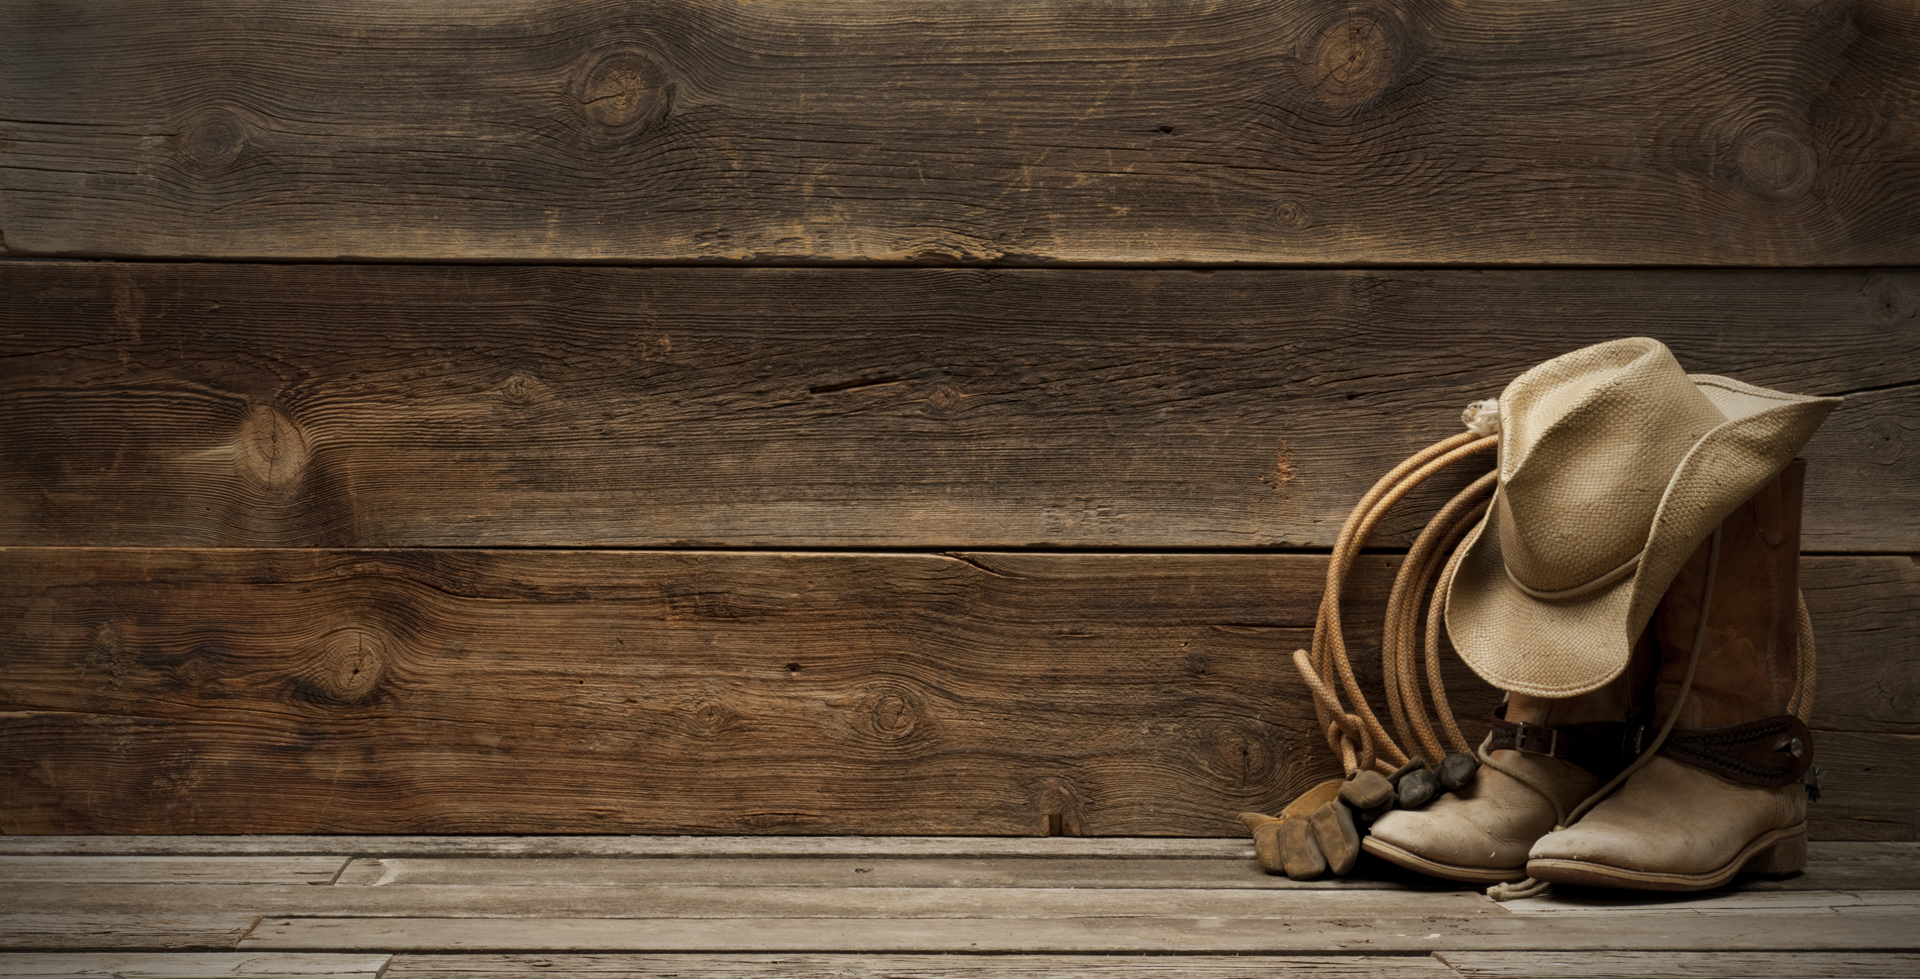 Western barnwood background w/boots,hat,lasso-extra wide - Concho Hills ...